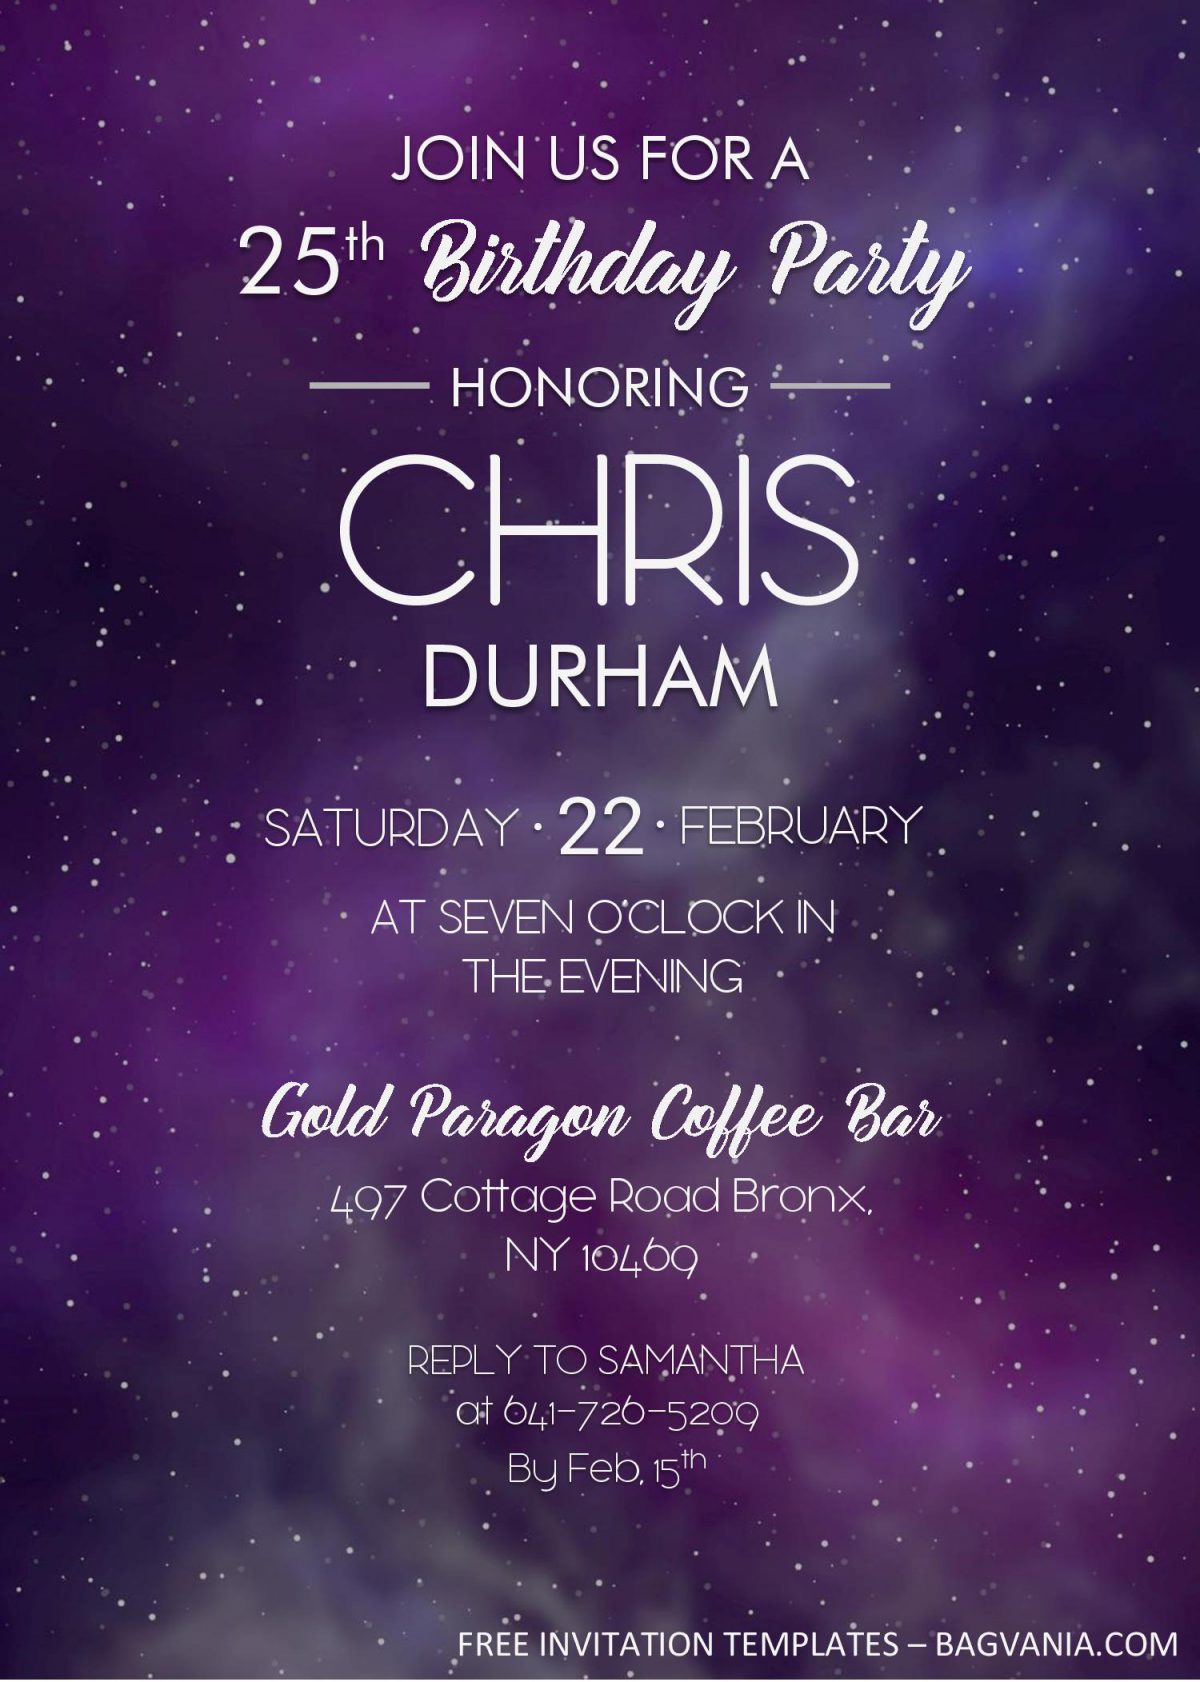 Galaxy Birthday Invitation Templates - Editable With MS Word and has constellation stars